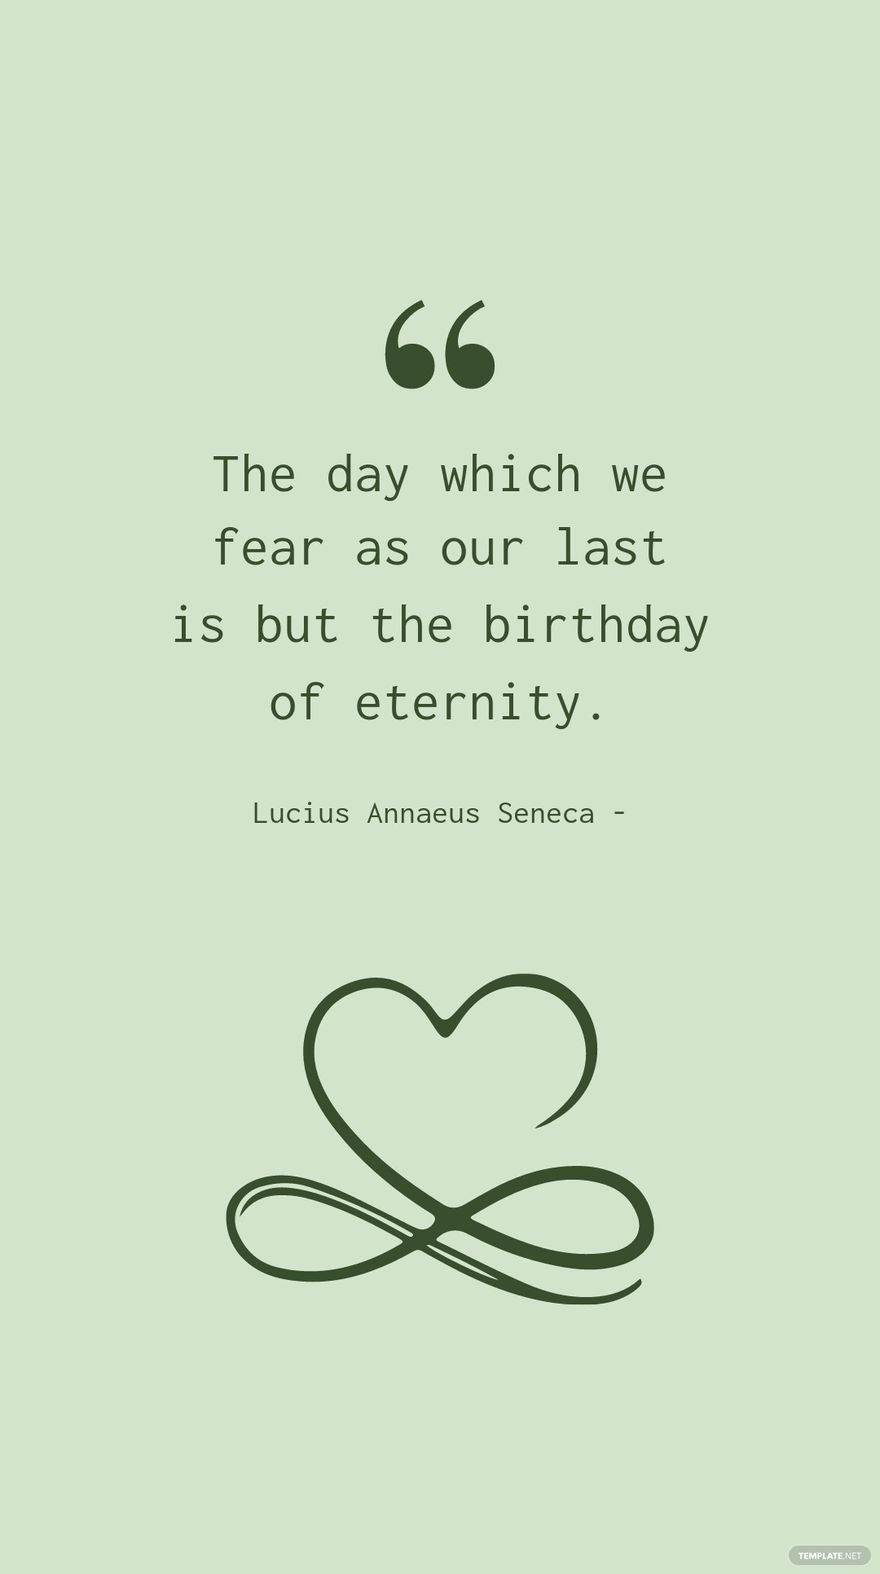 Lucius Annaeus Seneca - The day which we fear as our last is but the birthday of eternity.